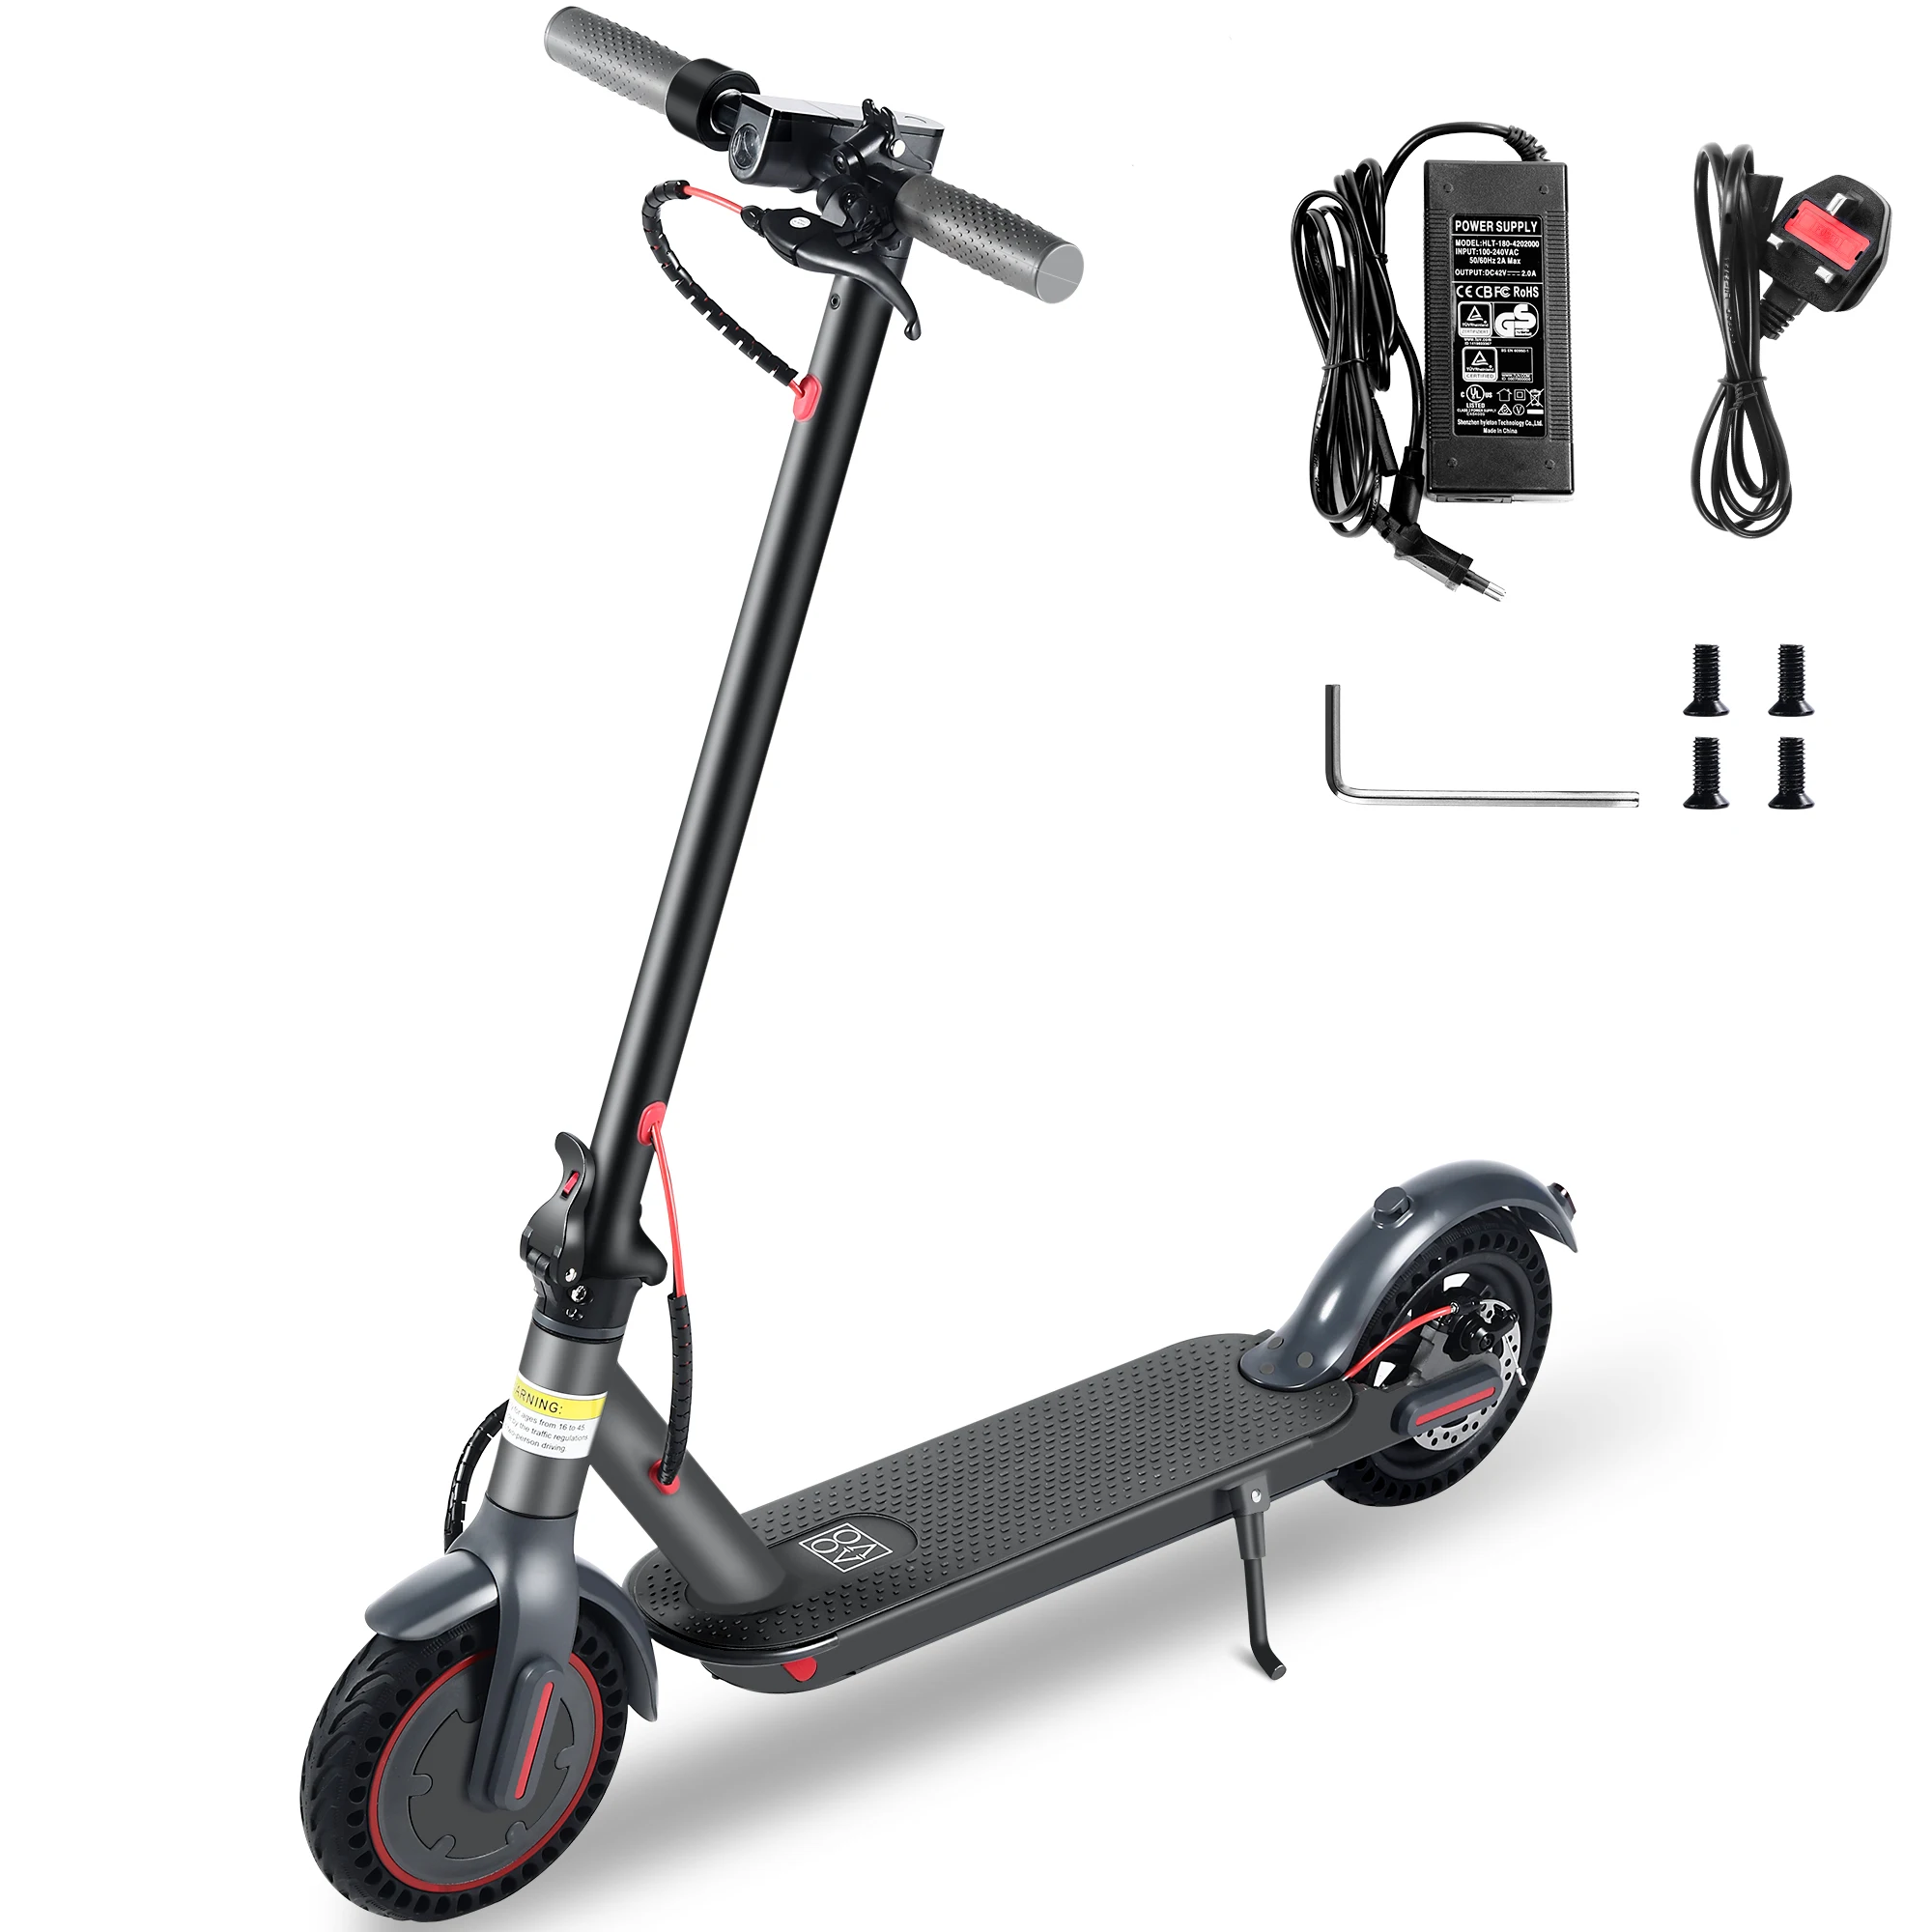 

Aovo UK/EU/USA Warehouse Dropshipping 350W Motor 10.5Ah e scooter M365Pro With Smart APP Foldable Adult Electric Scooter